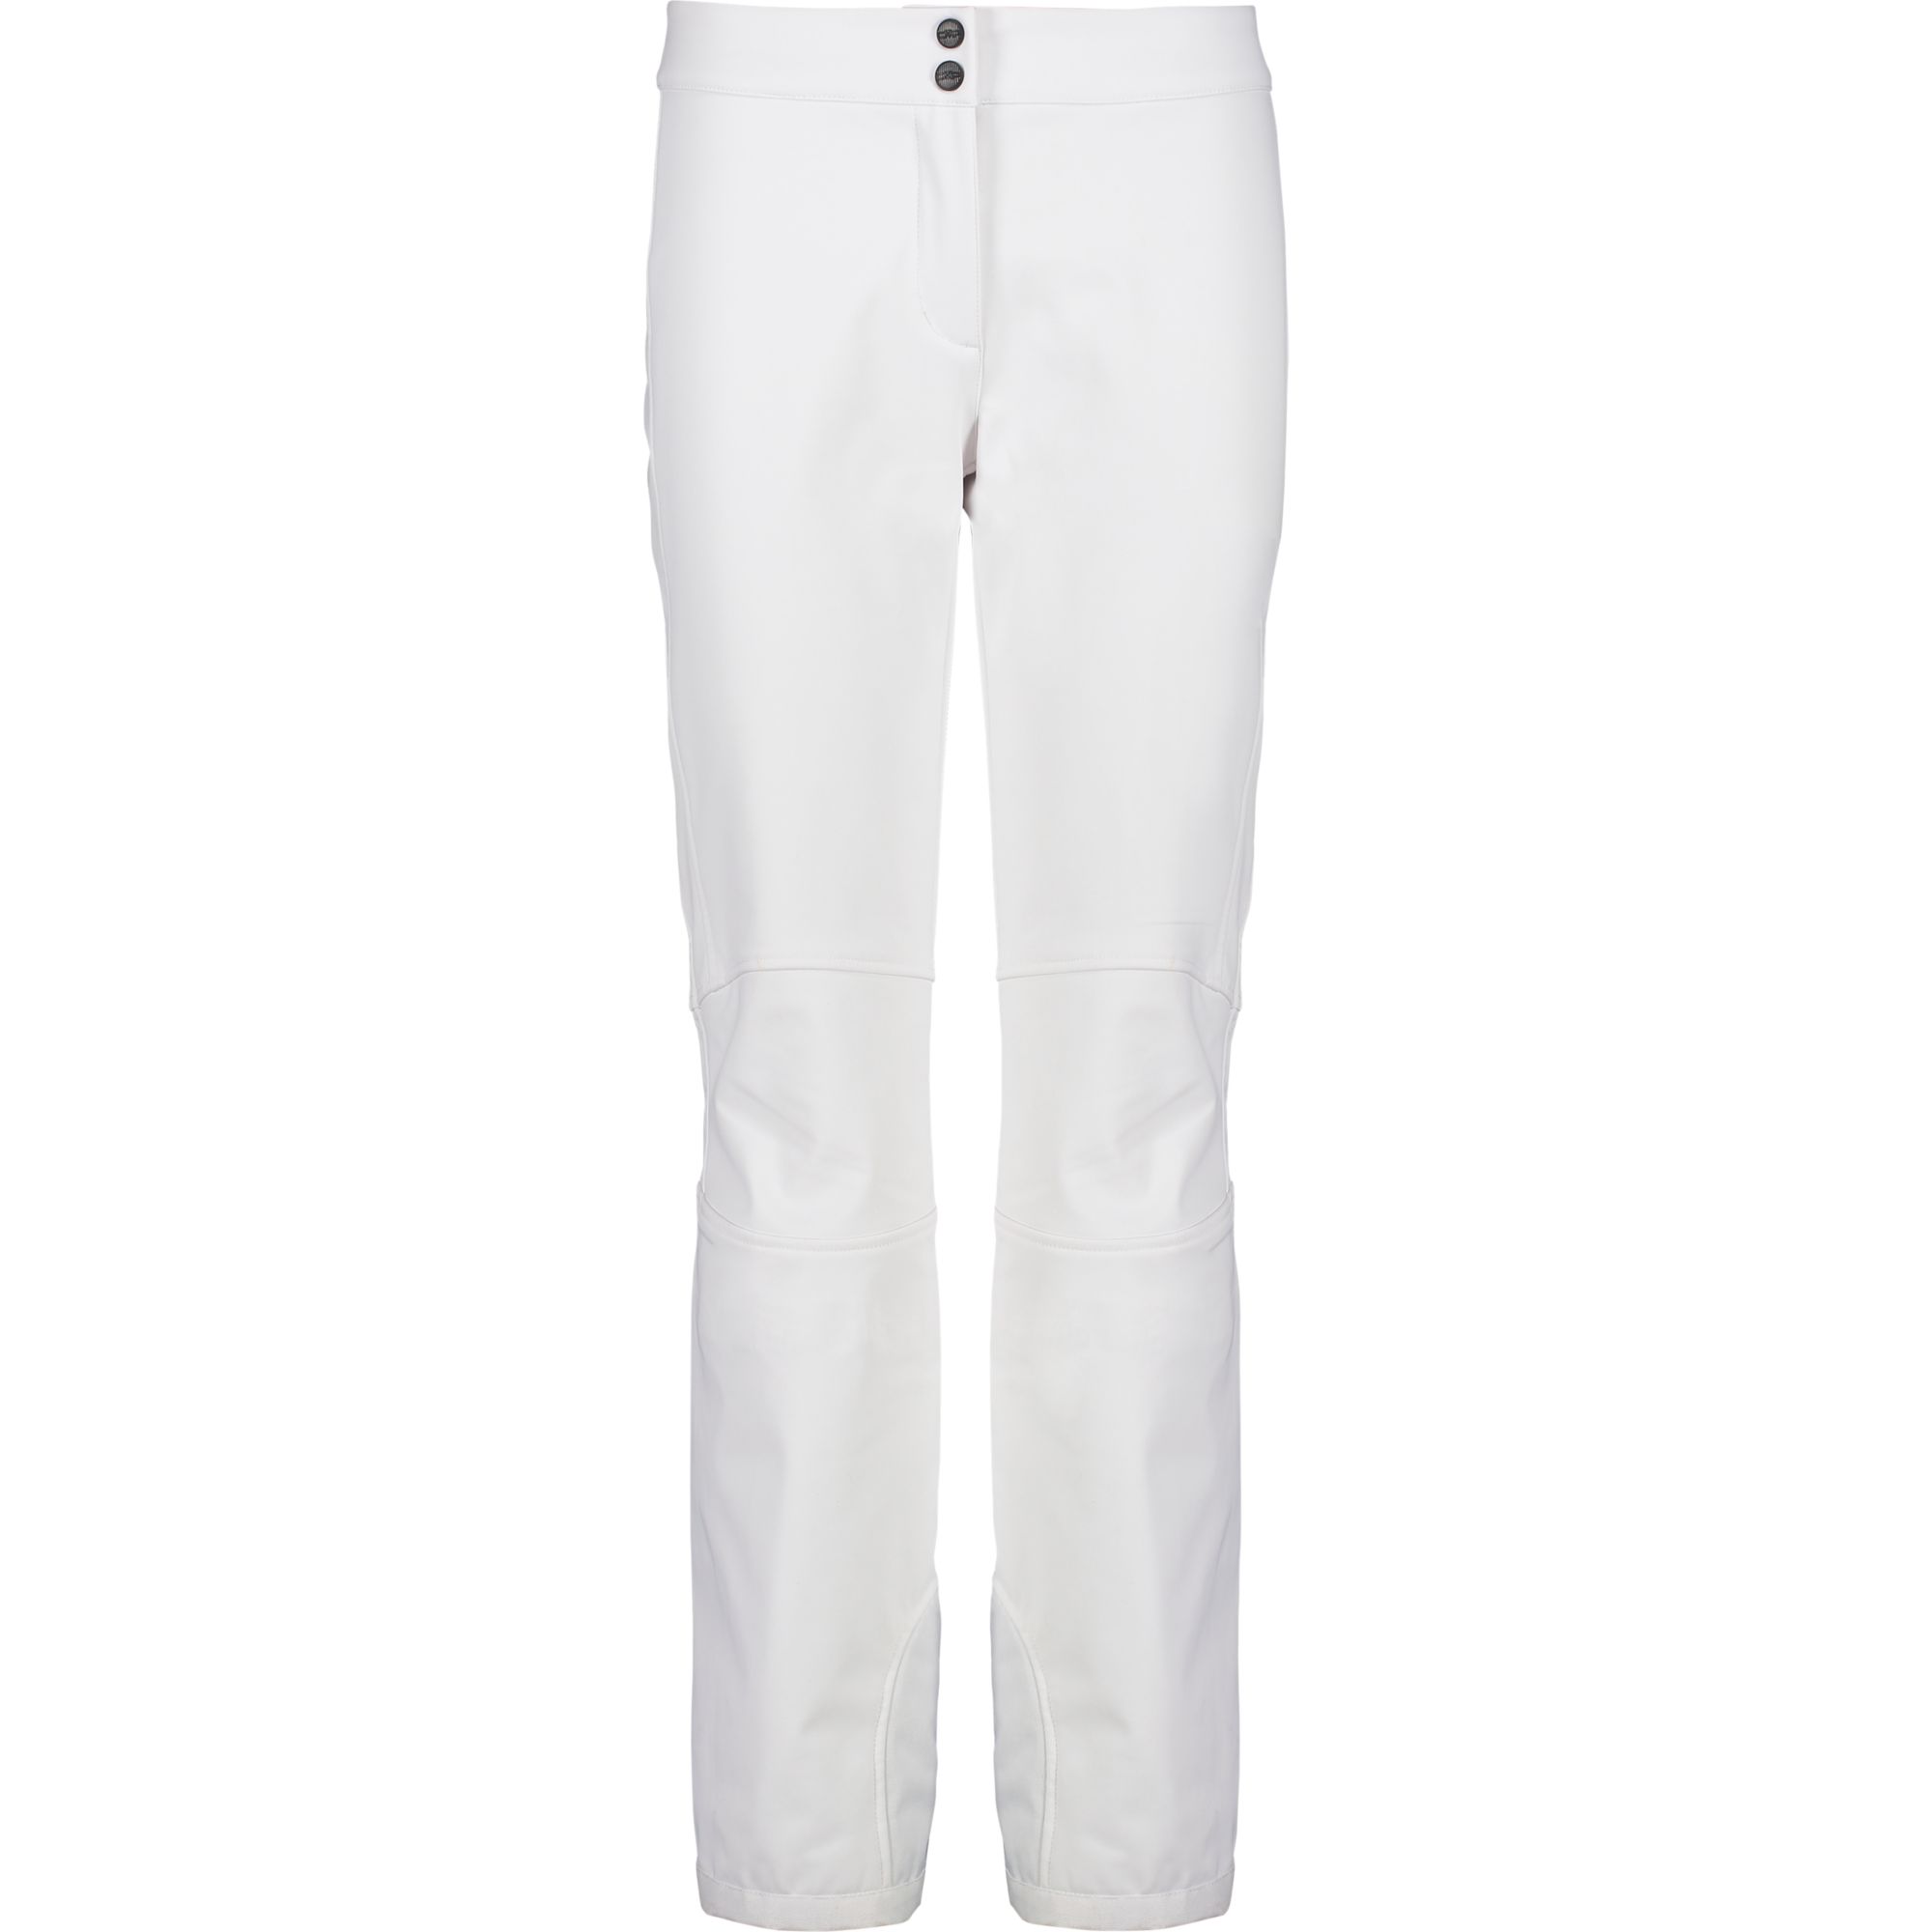 WOMAN PANT WITH INNER GAITER